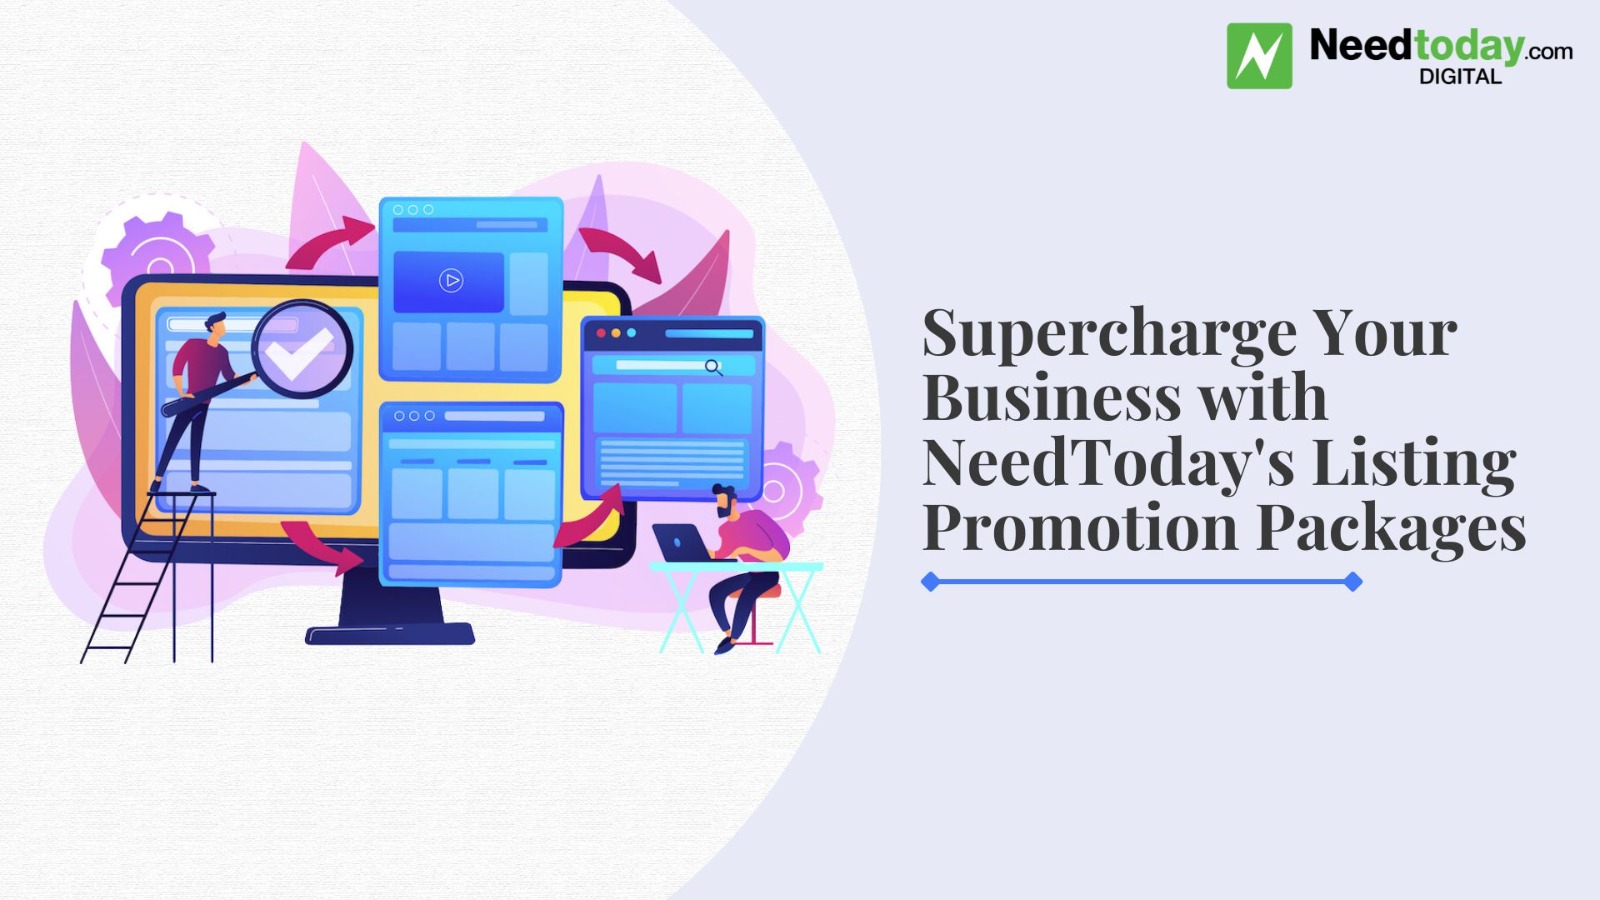 Supercharge Your Business with NeedToday's Listing Promotion Packages